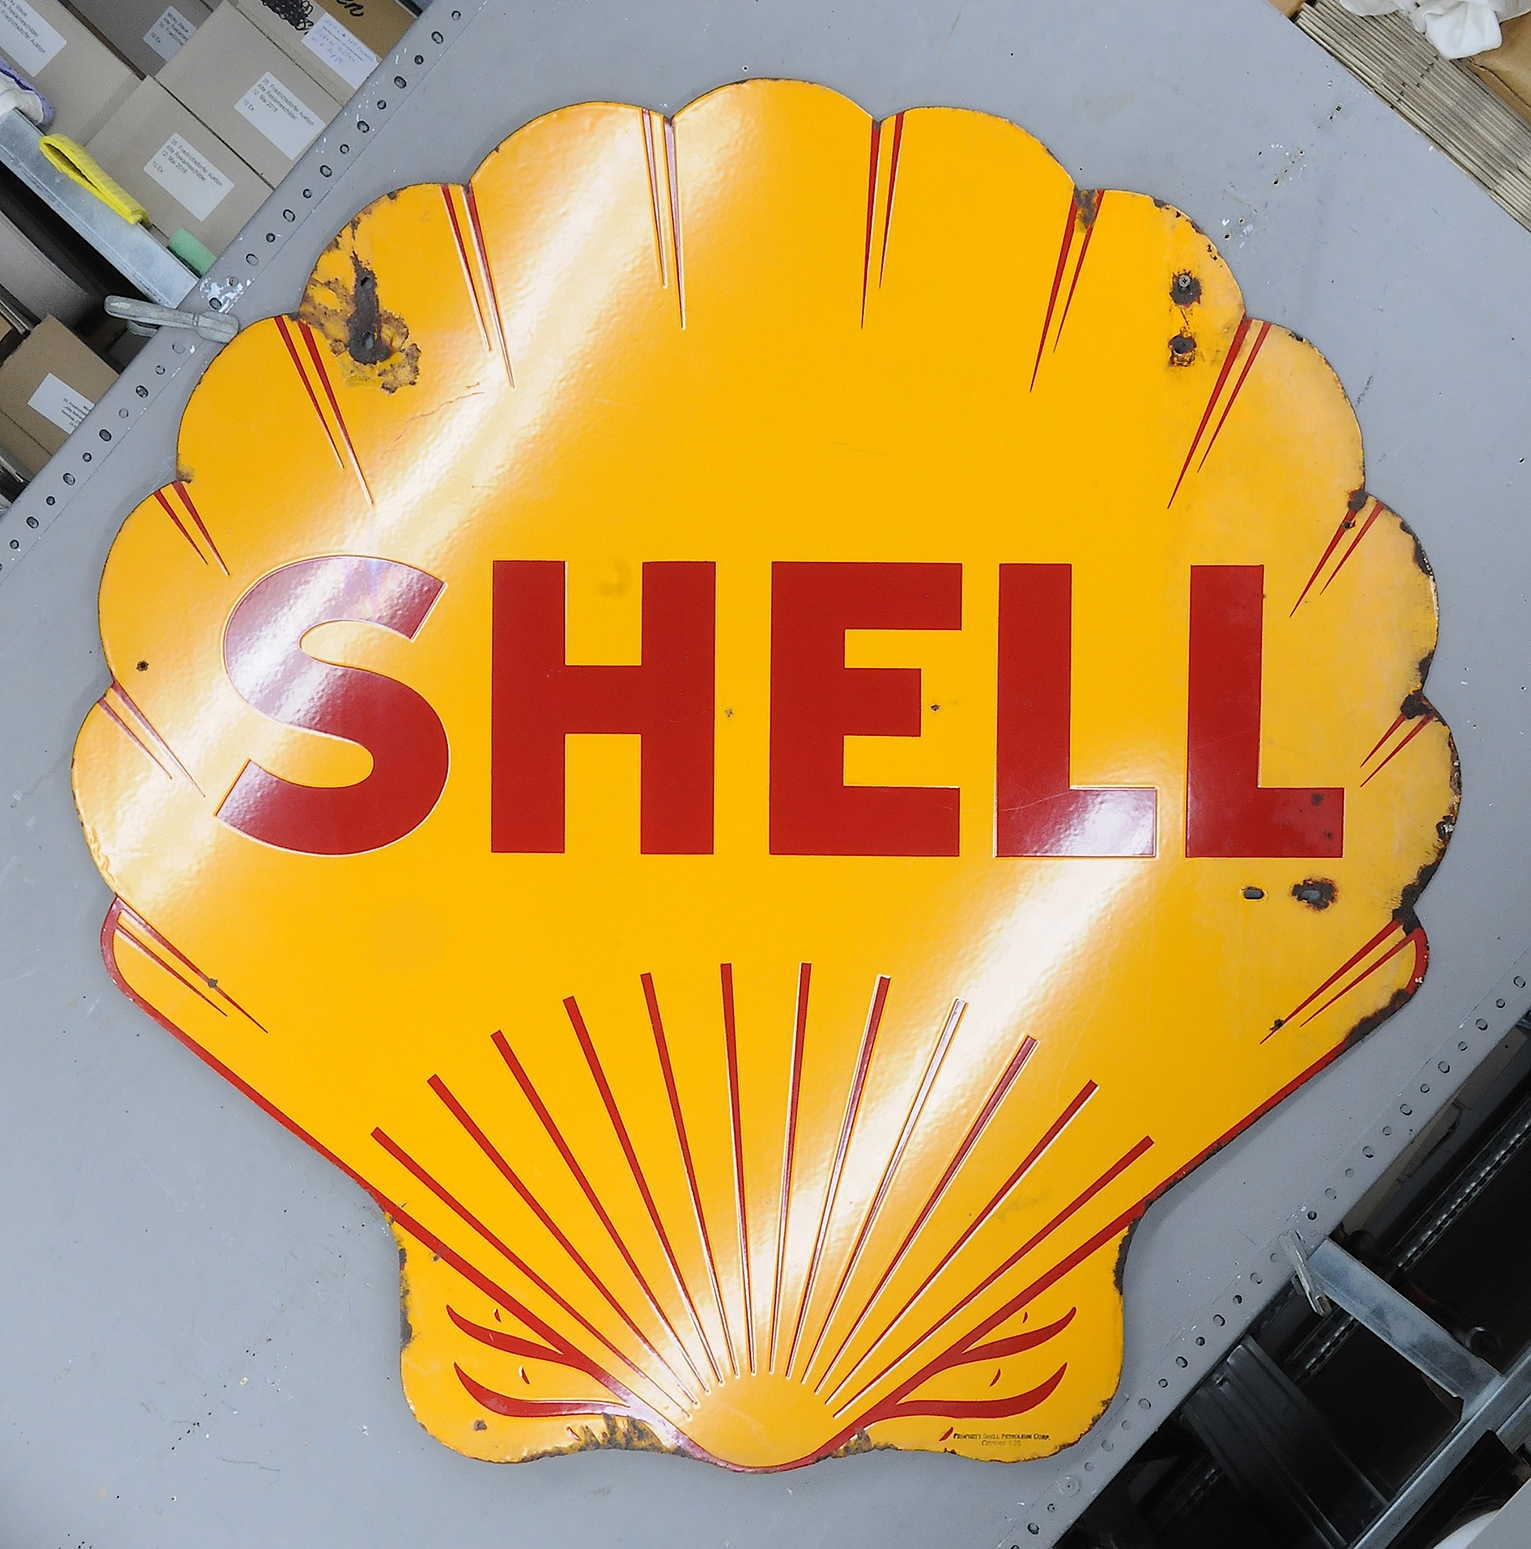 Shell - Image 3 of 4